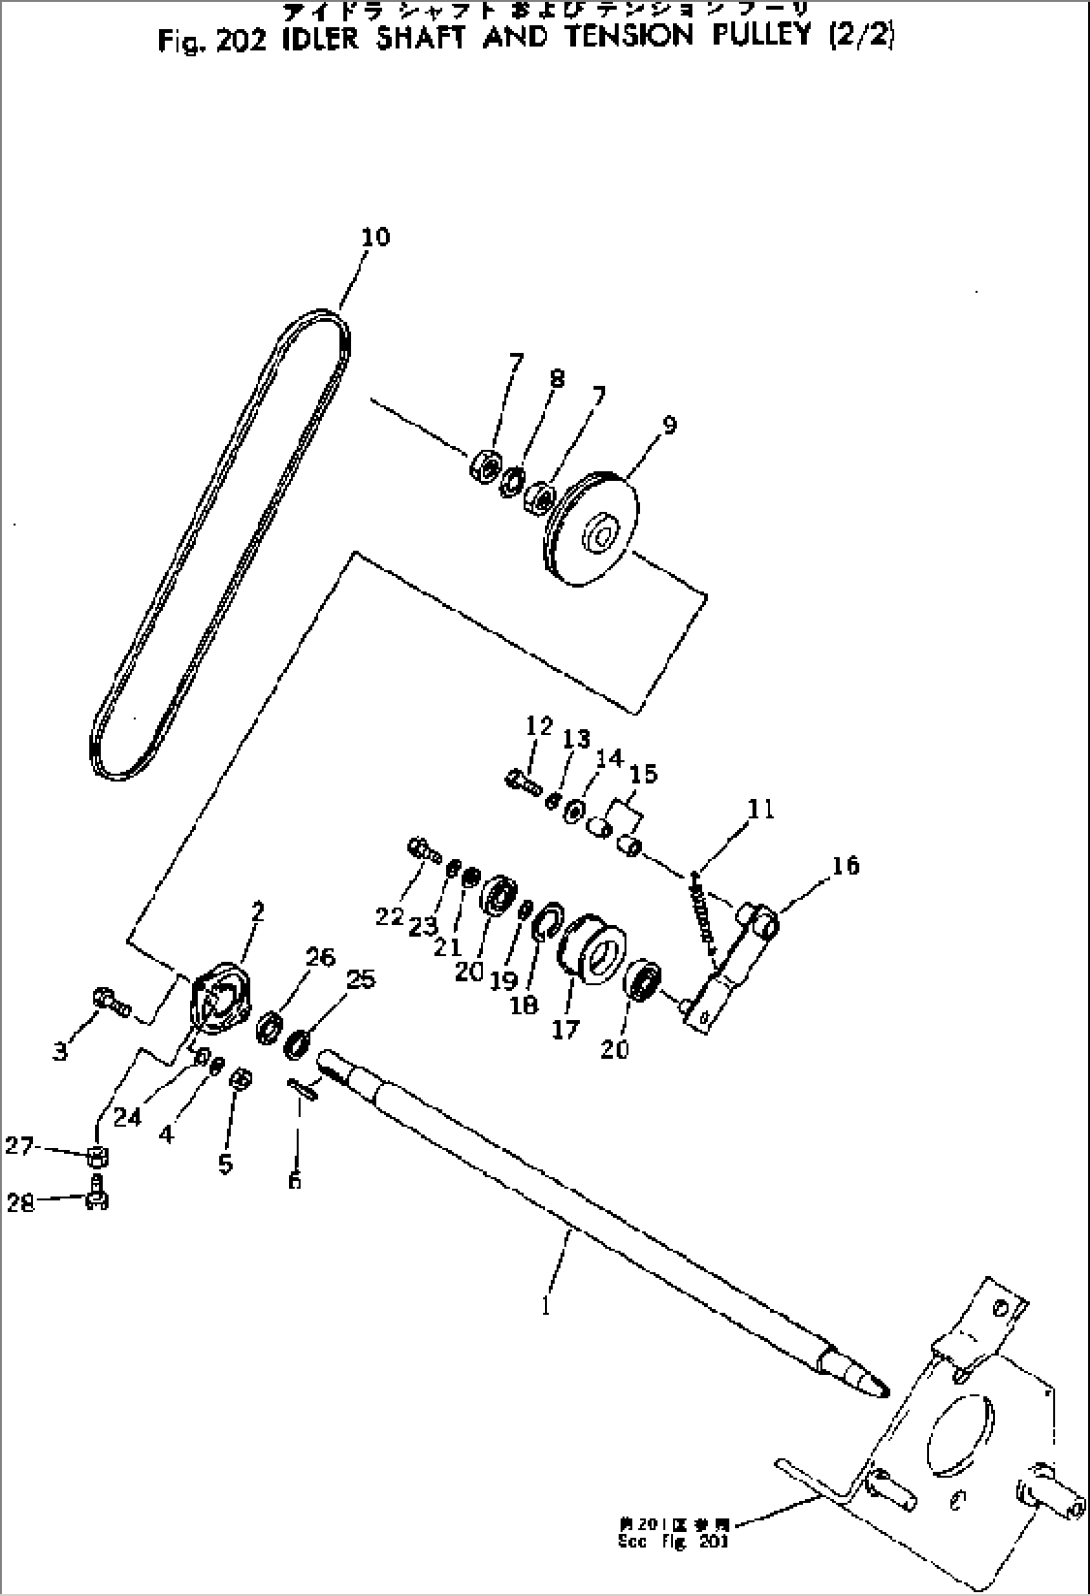 IDLER SHAFT AND TENSION PULLEY (2/2)